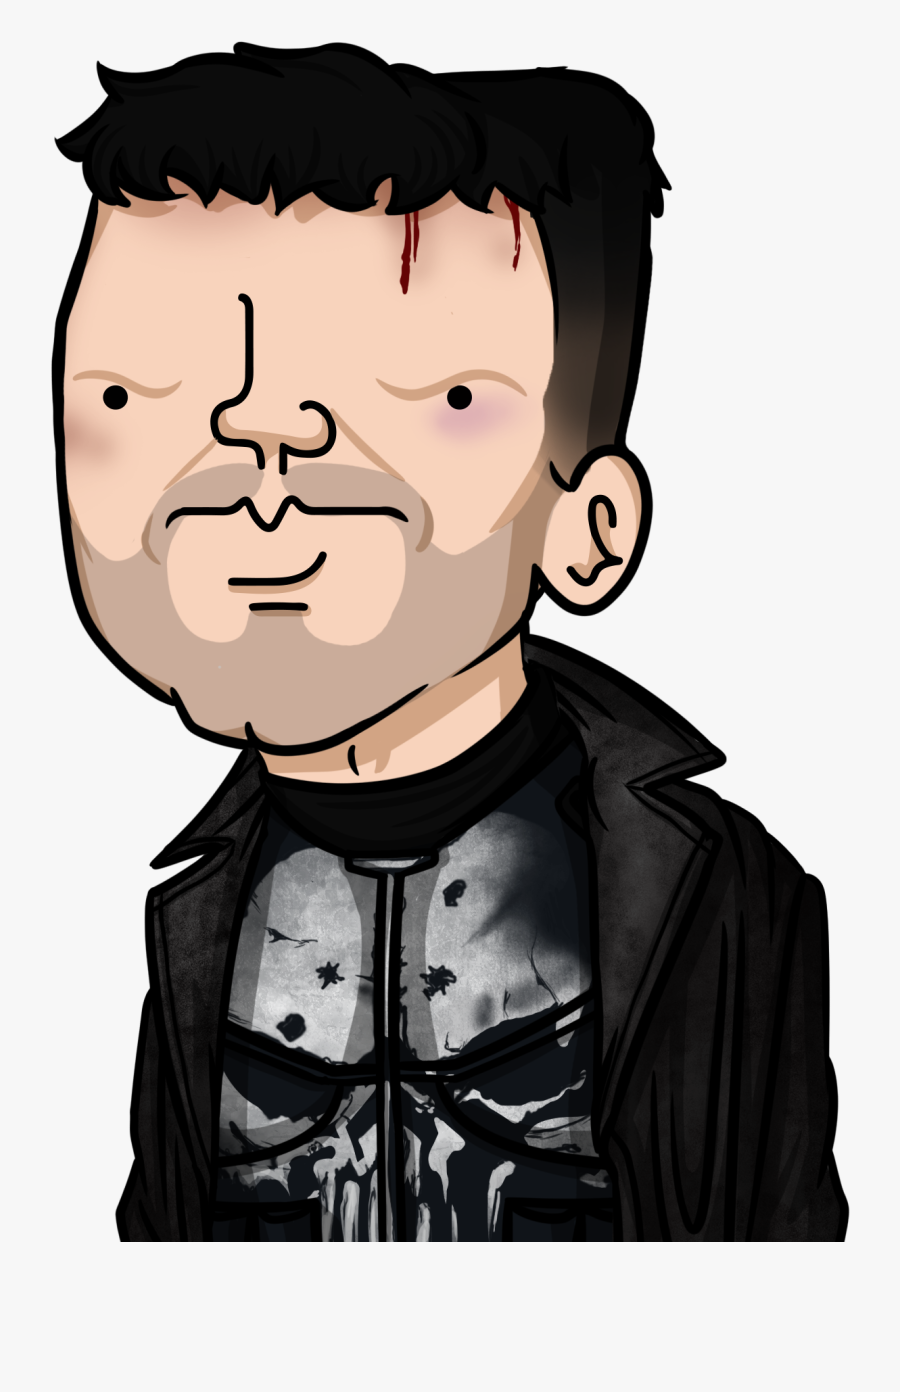 Terracid As The Punisher /frank Castle - Cartoon Punisher, Transparent Clipart